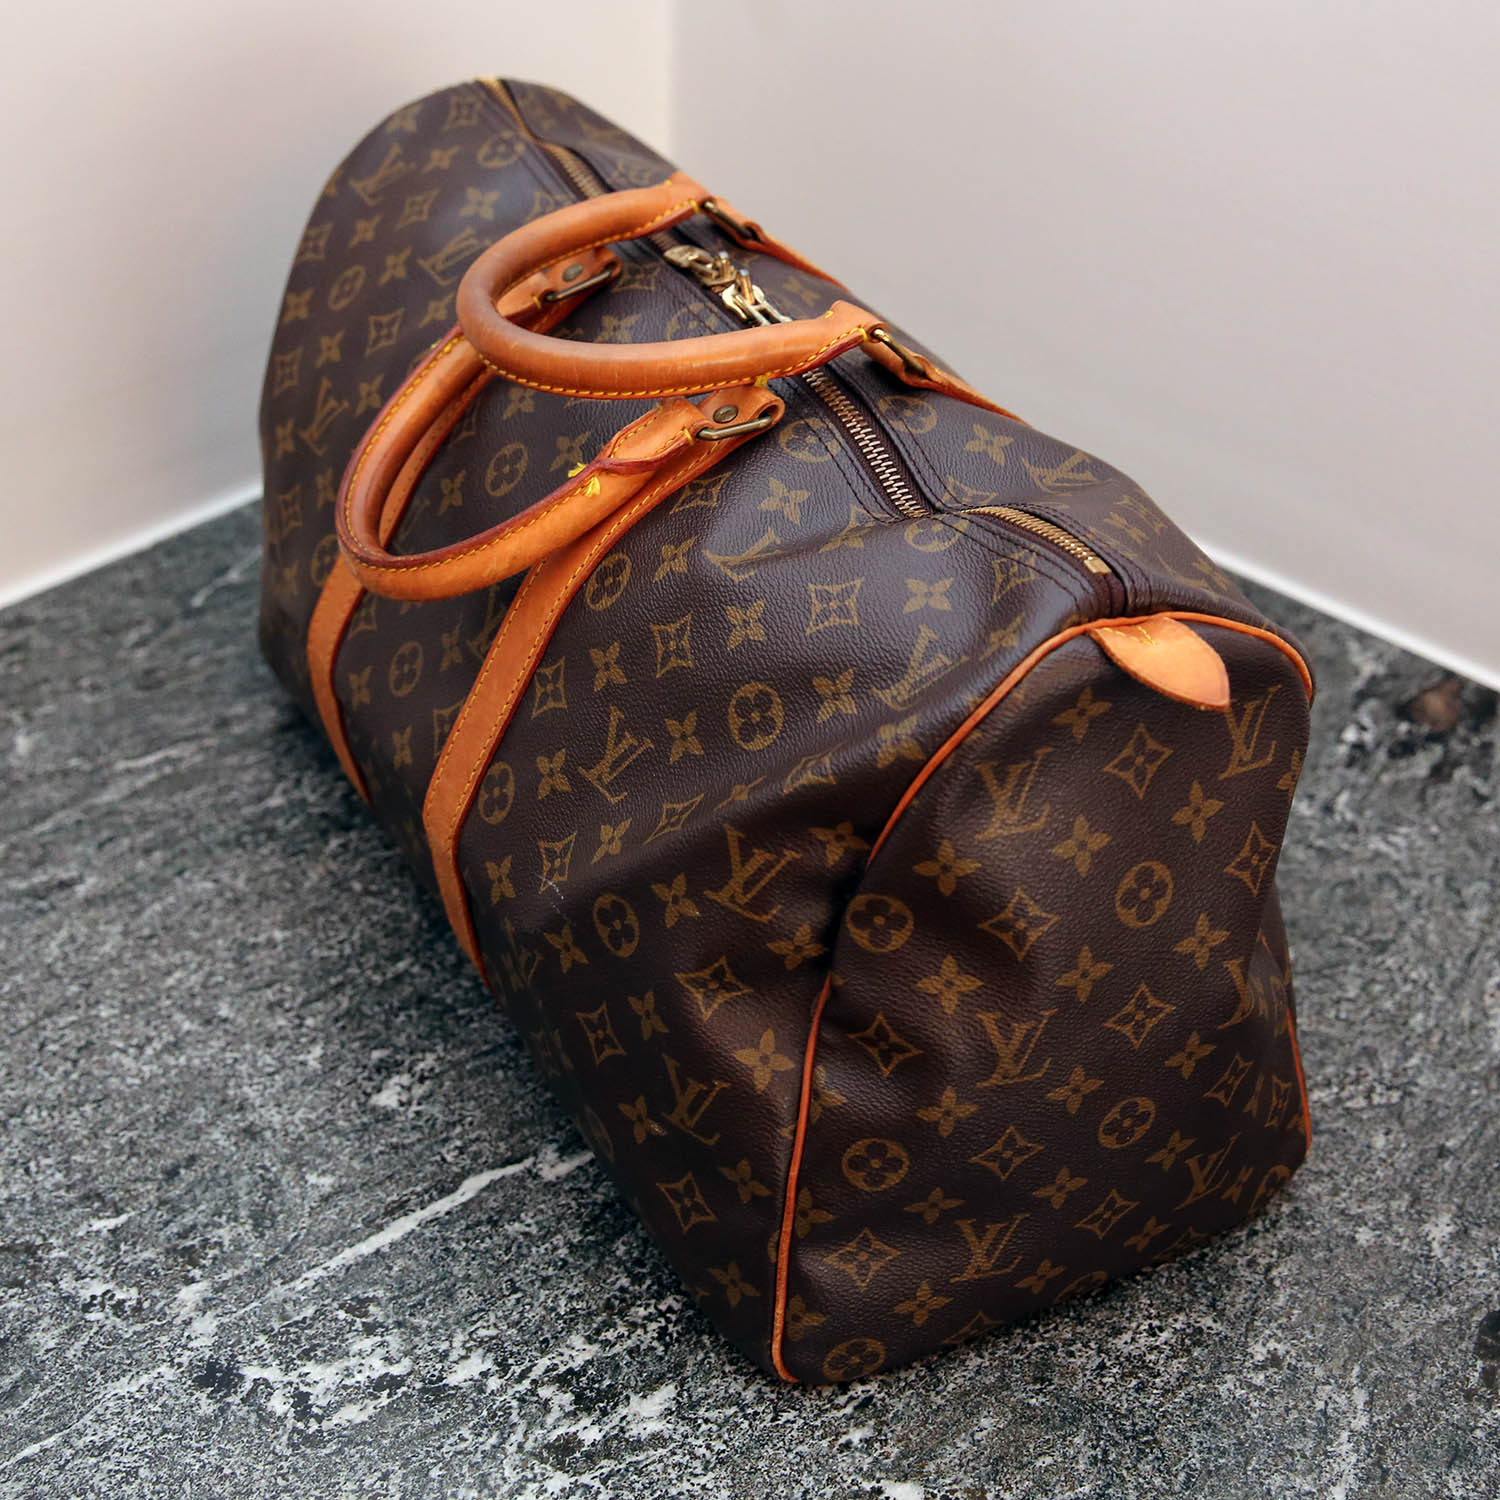 Louis Vuitton Keepall 45 - www.lvspeedy30.com - Pre-owned Louis Vuitton and other luxury brands